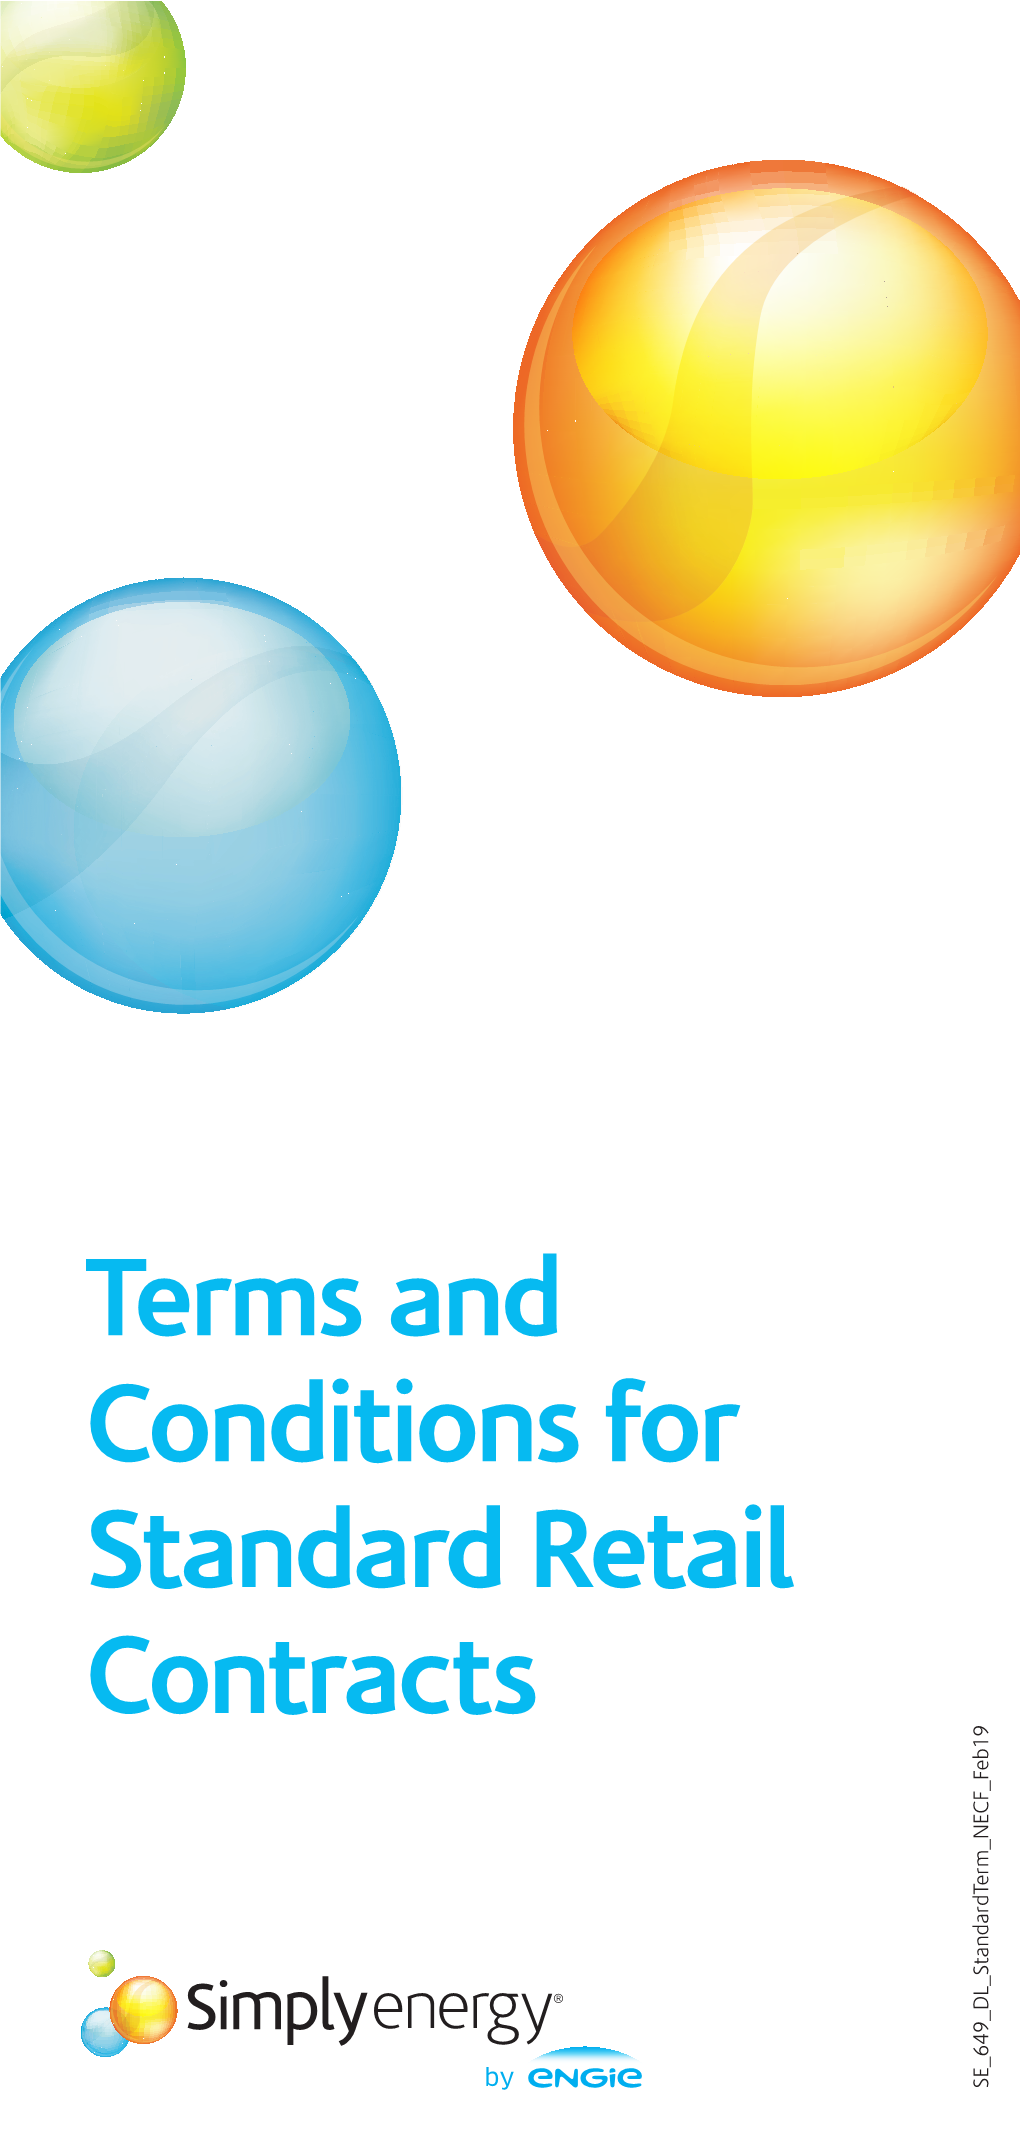 Terms and Conditions for Standard Retail Contracts